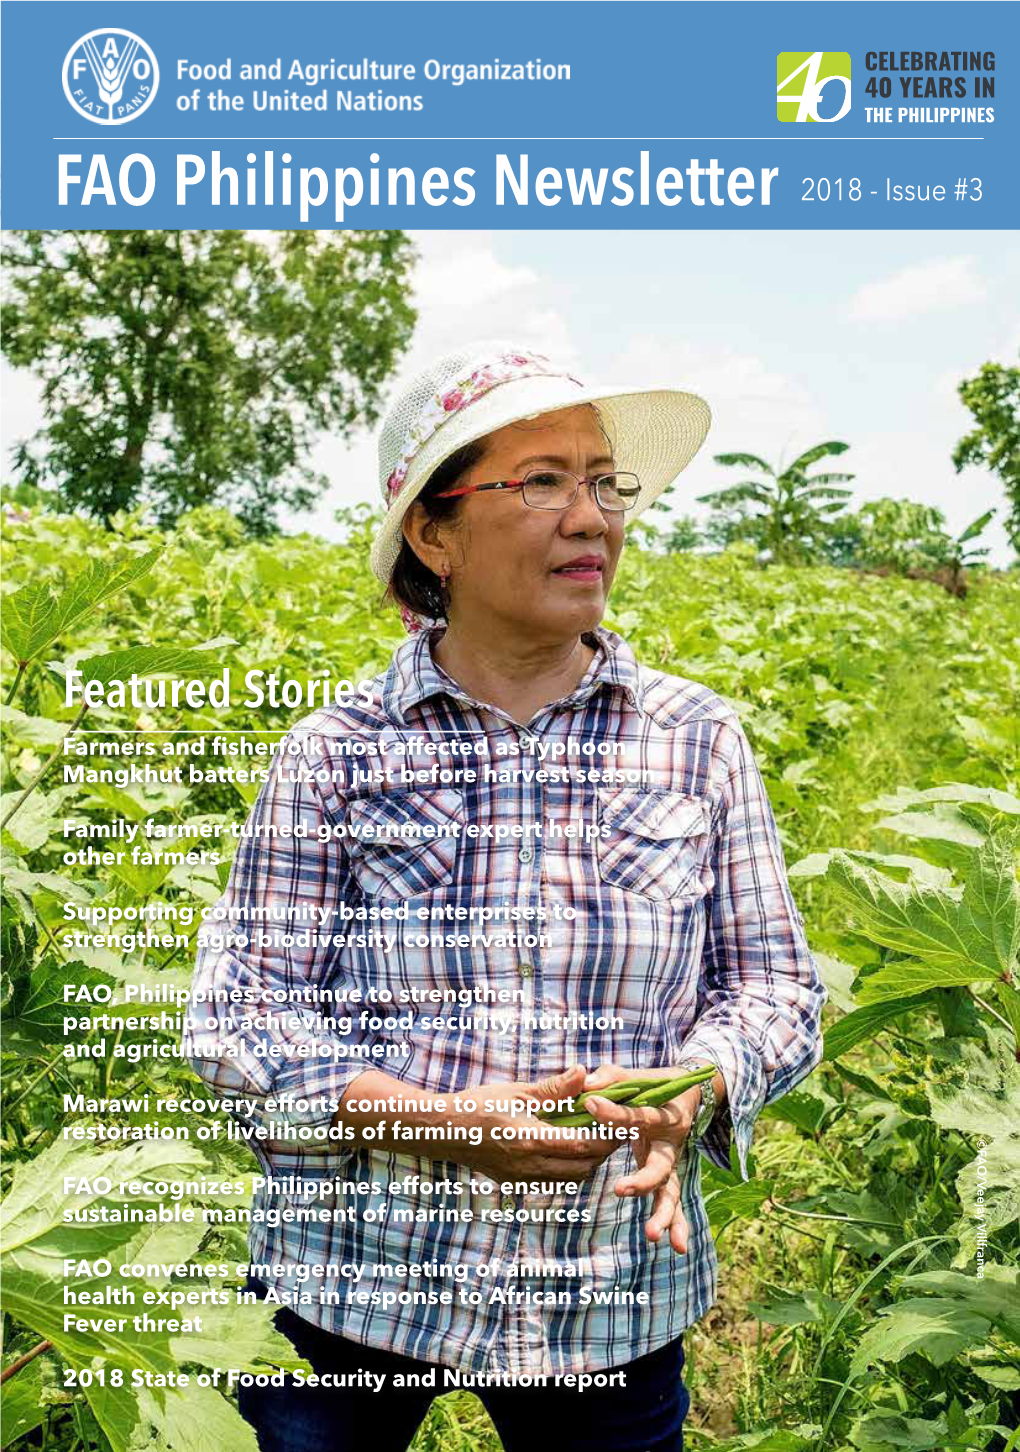 FAO Philippines Newsletter Philippines FAO Cover Photo: Ester Toledo, a Beneficiary of FAO Project in Nueva Ecija Following WELCOME Typhoon Koppu in 2016